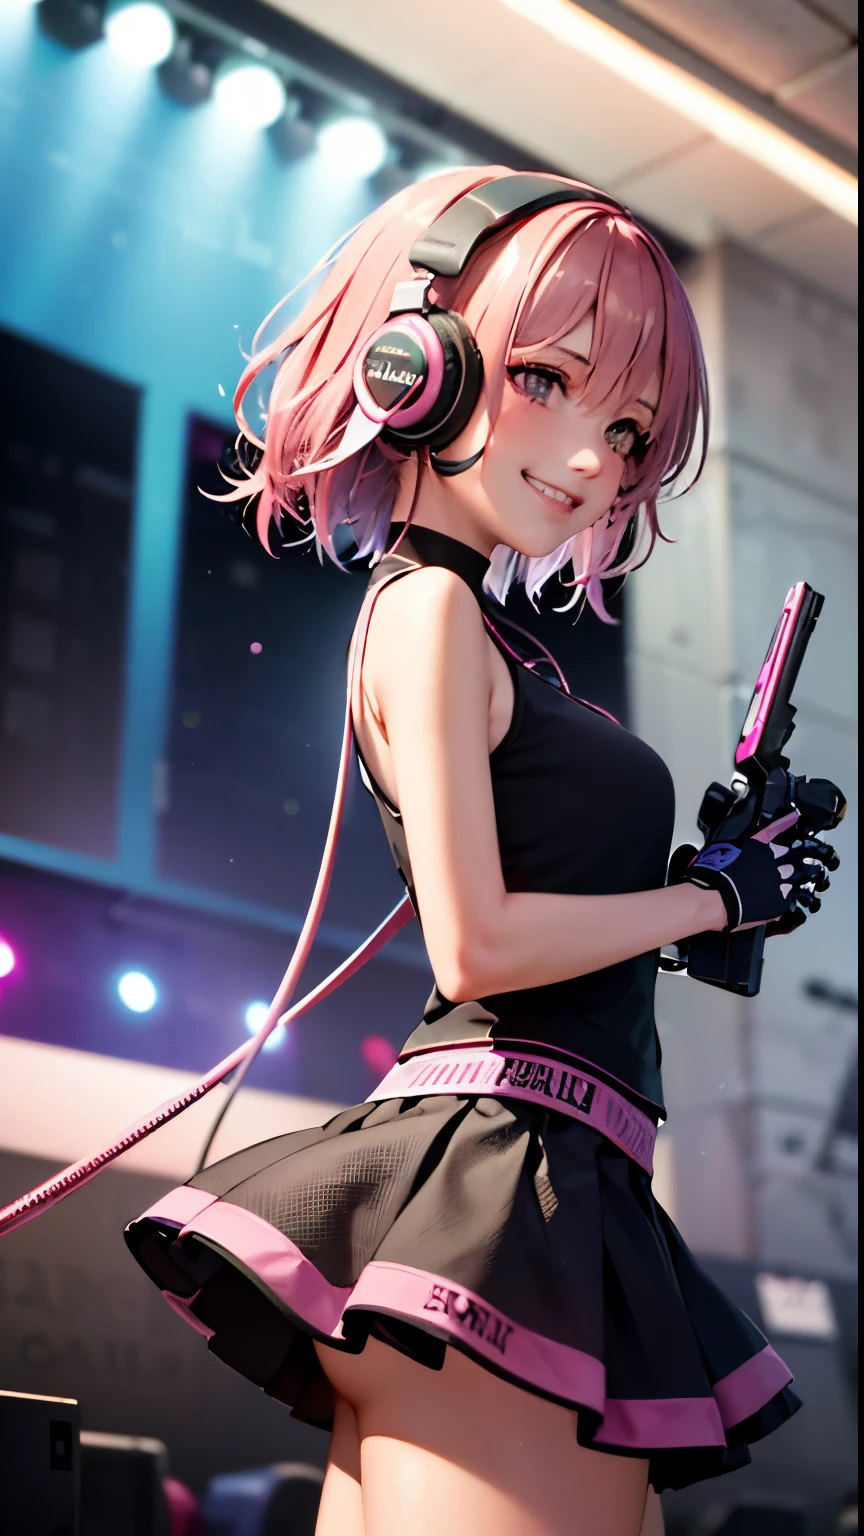 (Masterpiece, best quality: 1.2), 1 girl, pink-purple hair, side half, back to the camera, body is skeleton, solo, headphones, cyberpunk, grinning, eyes looking at the audience, purple-pink hair, headphones, sleeveless shirt, pleated skirt, holding cold weapons